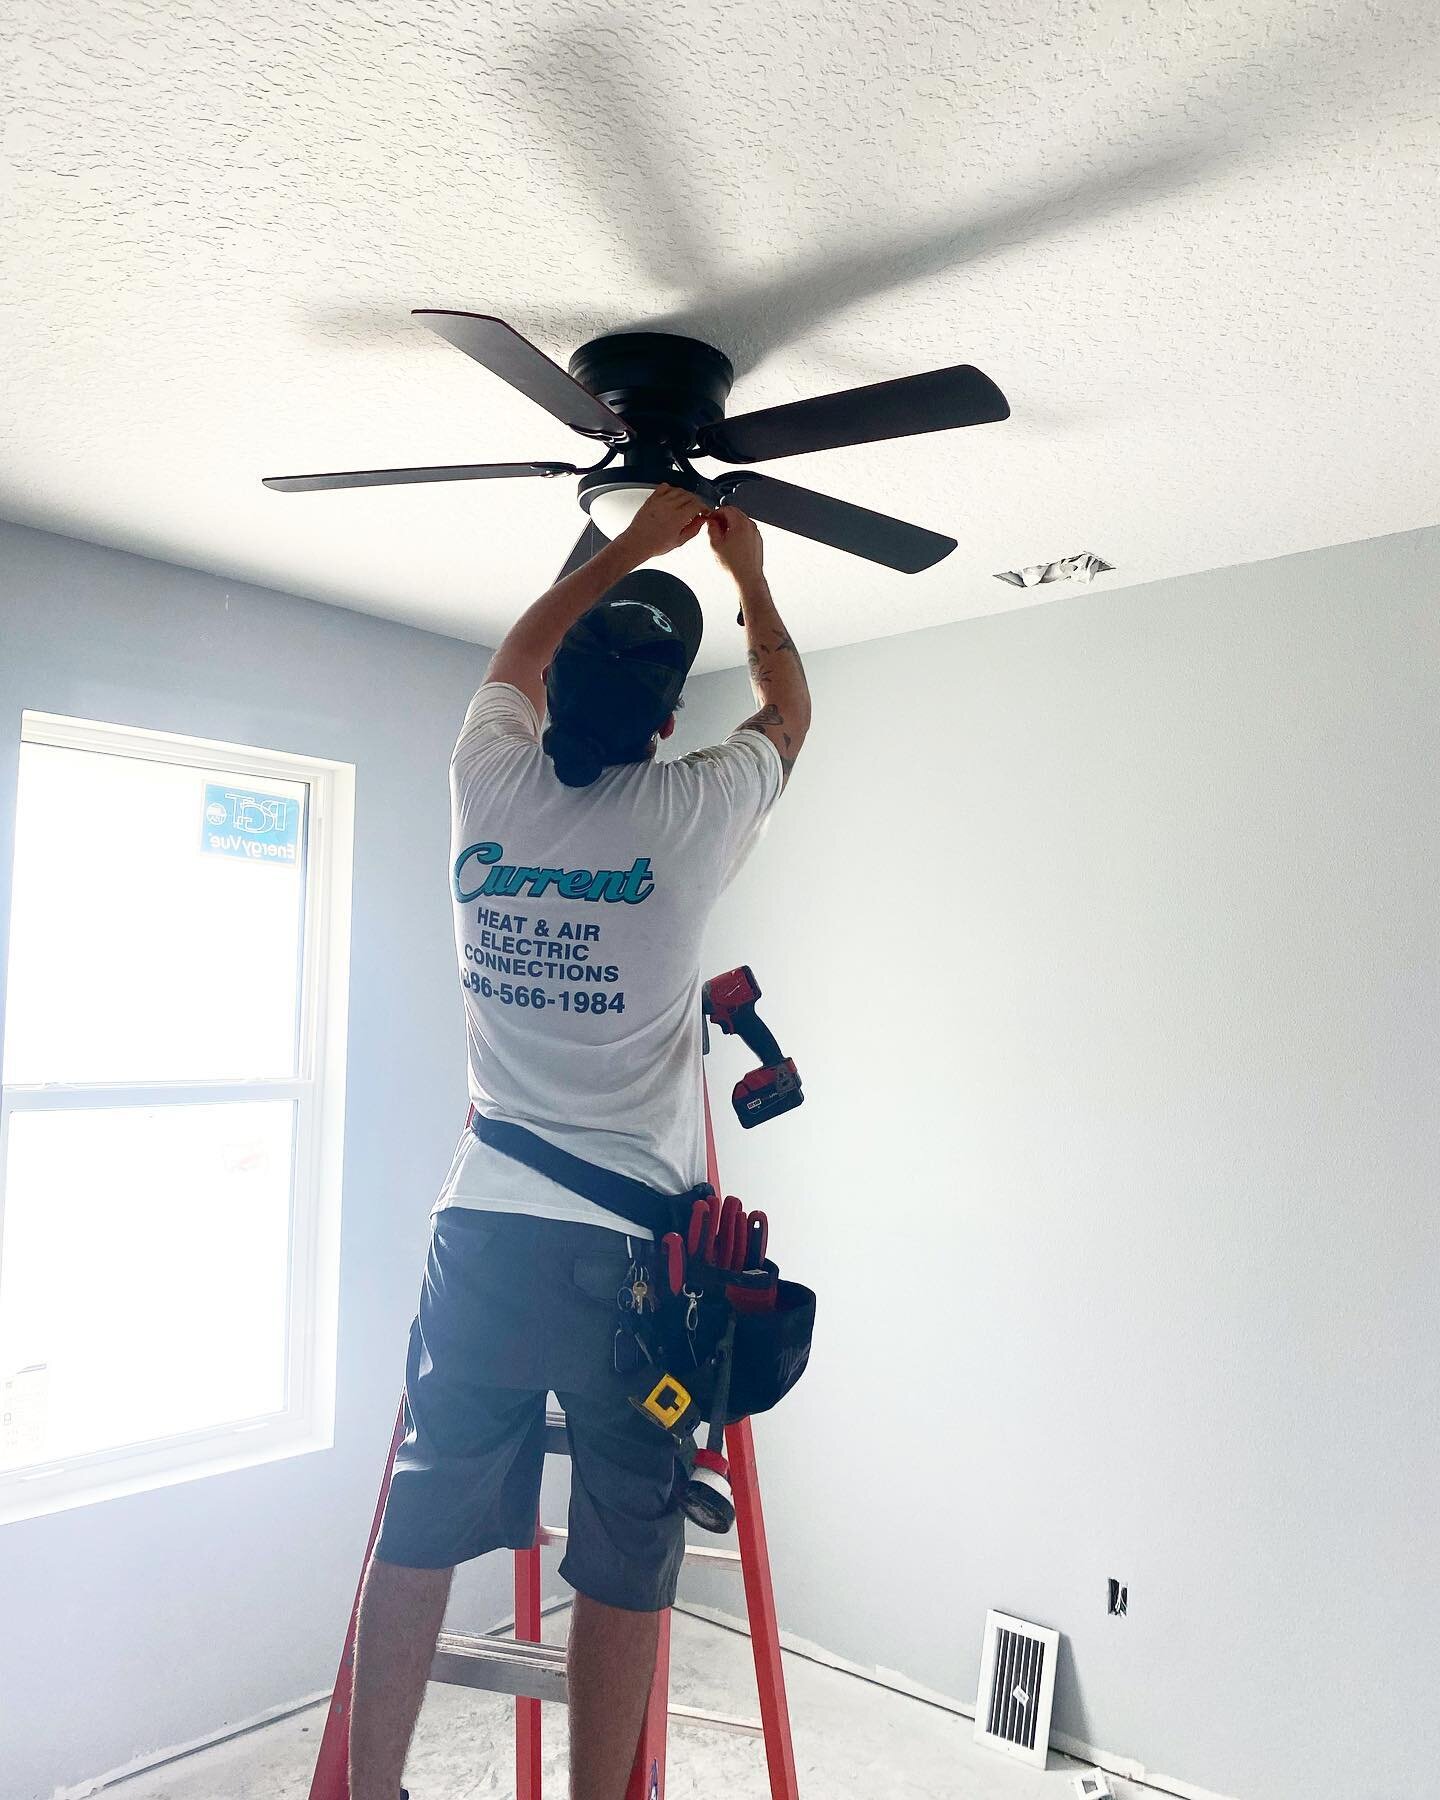 Fall is right around the corner, and with that comes REDECORATING😍 You would be amazed at how much a new ceiling fan, or even adding a few recess light, can improve the visual quality of your living space! Change it up and add some of those finishin